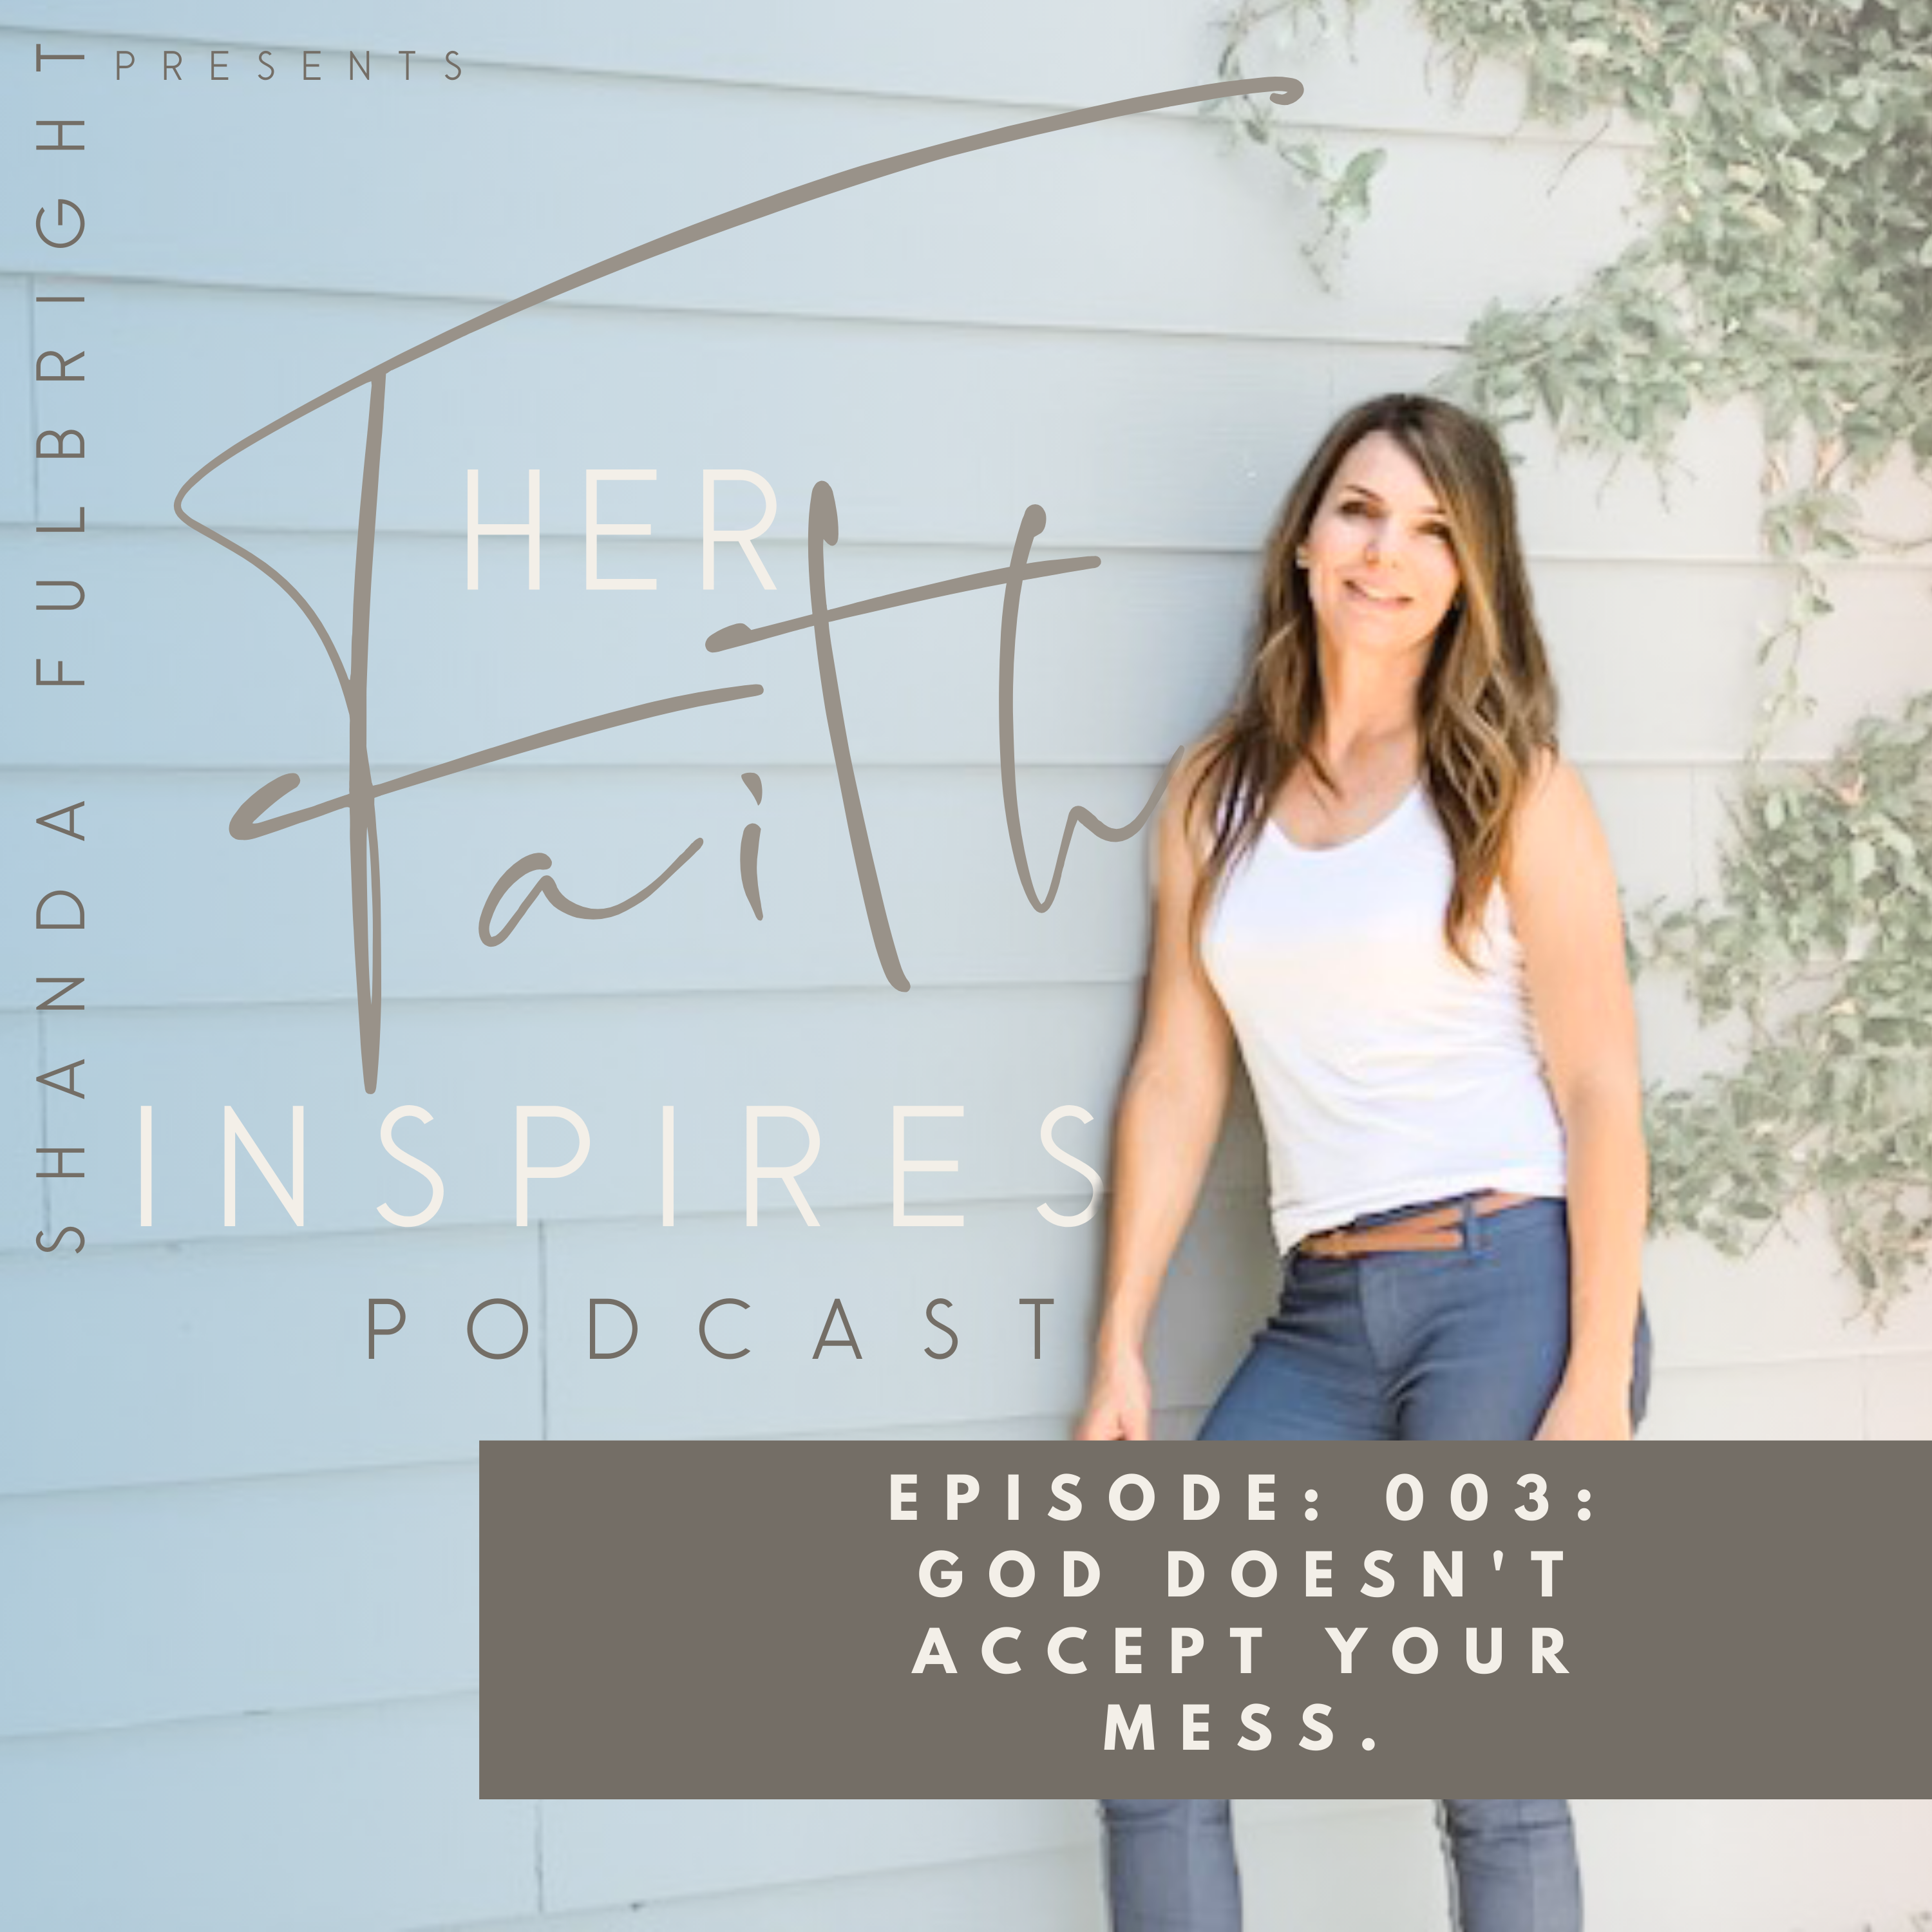 Shanda Fulbright Podcast Episode3 - Her Faith Inspires Podcast 003: God Doesn't Accept Your Mess.